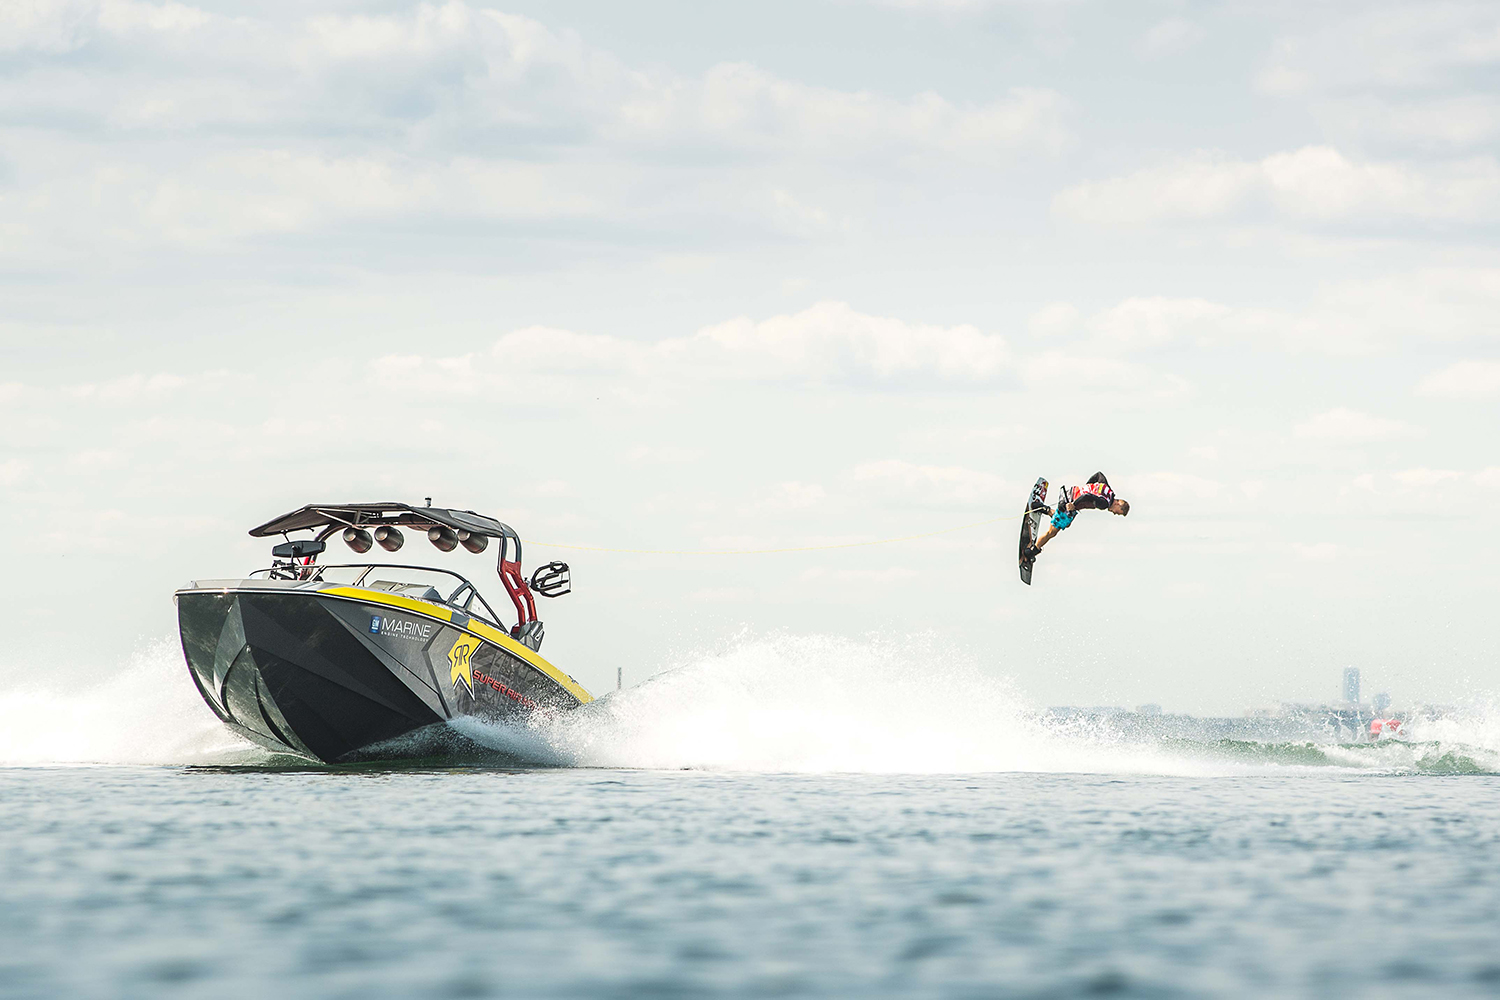 THE NAUTIQUE WWA WAKEBOARD WORLDS WRAP-UP IN TORONTO! Nautique Boats